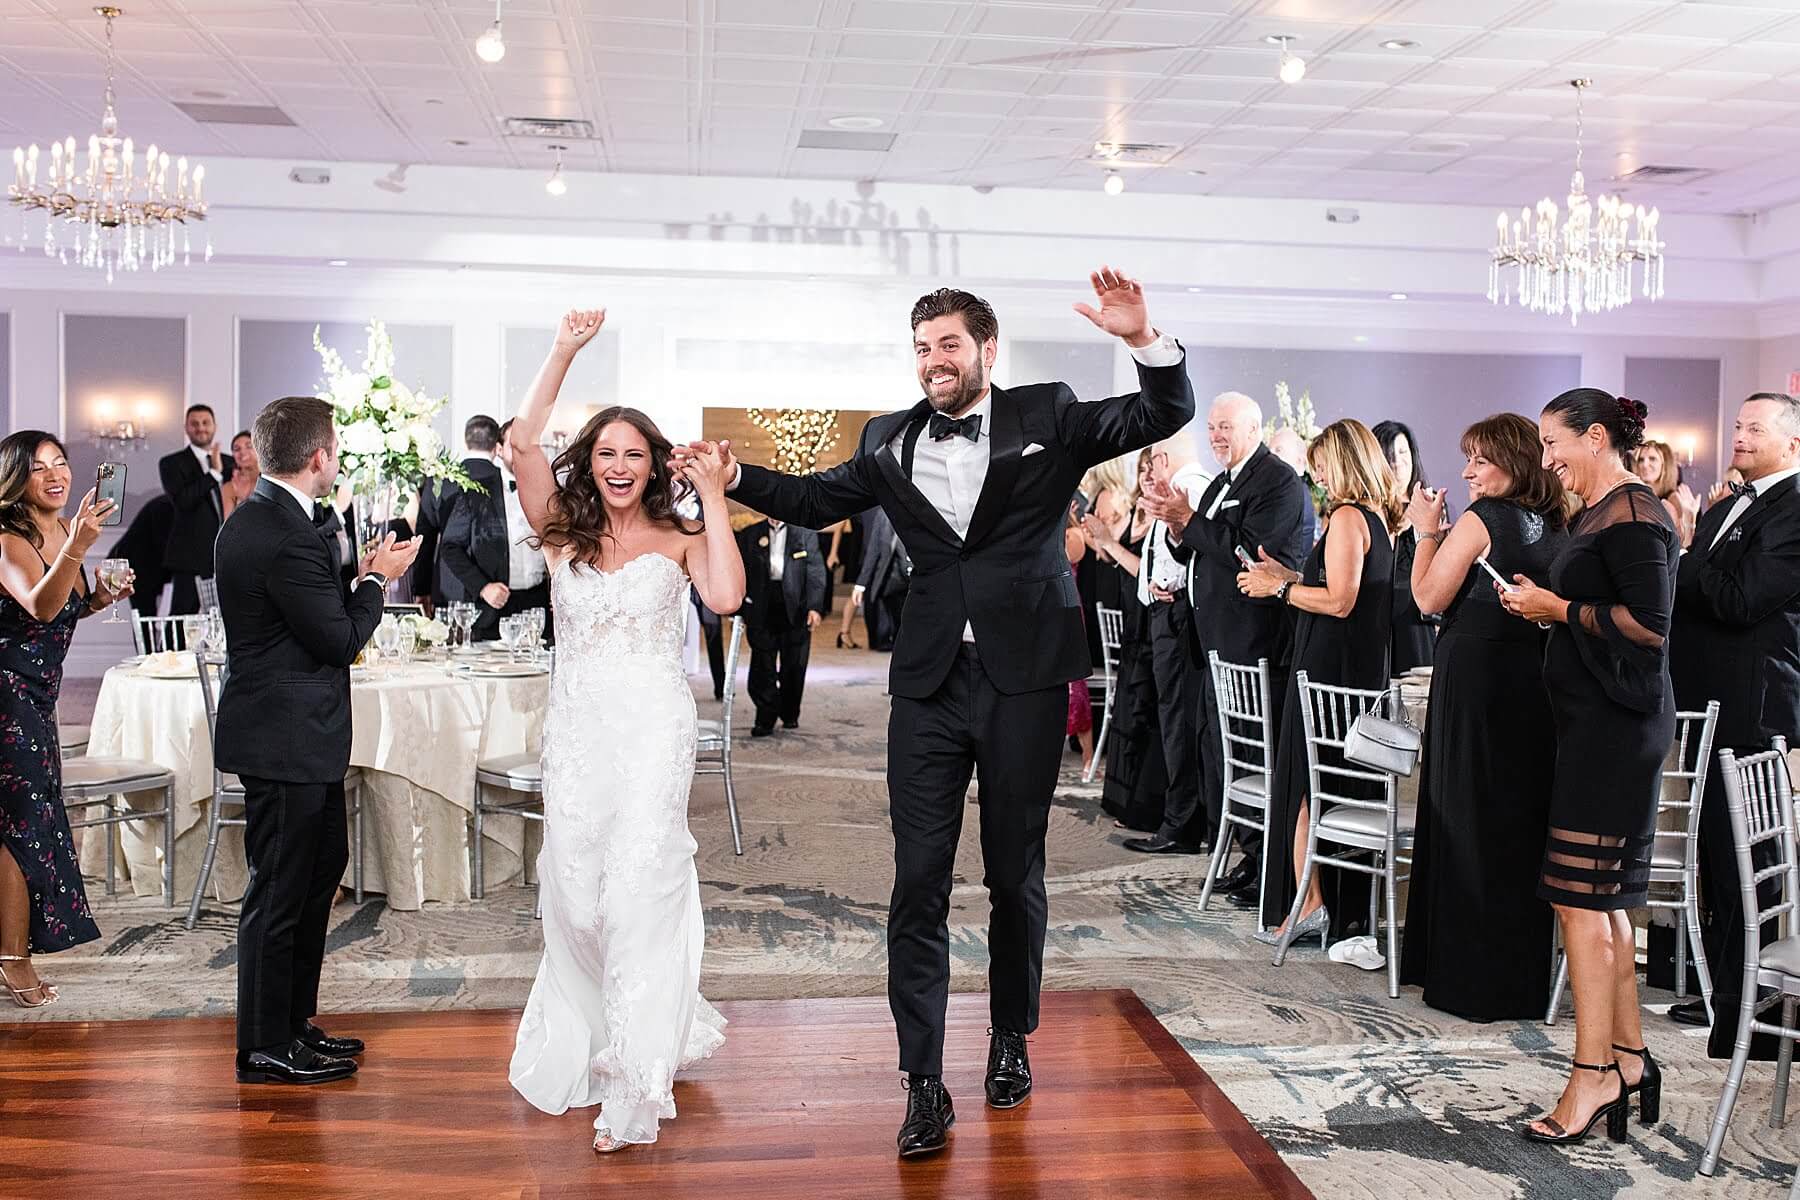 A newly married couple walks down the aisle at their New Jersey wedding reception.